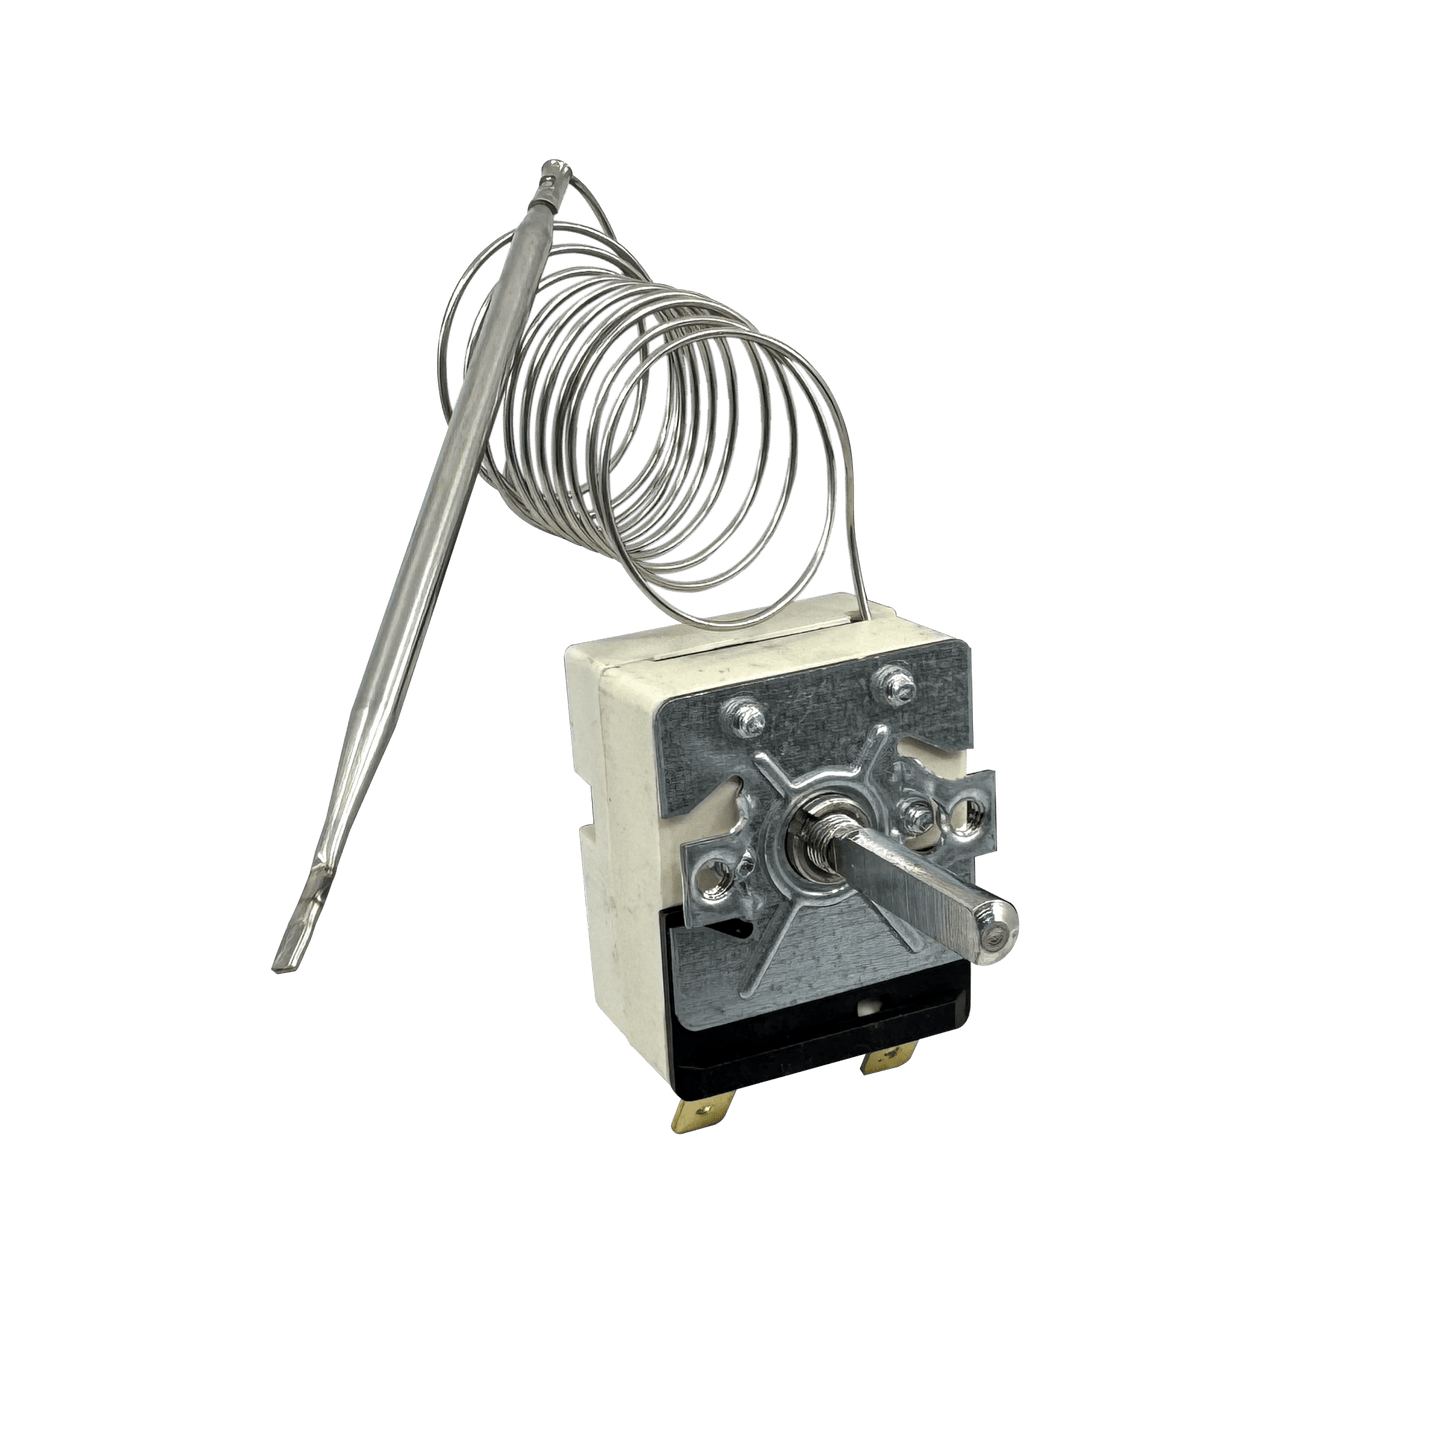 S10 Heating Element Control Thermostat - W.S. Industries, Inc.